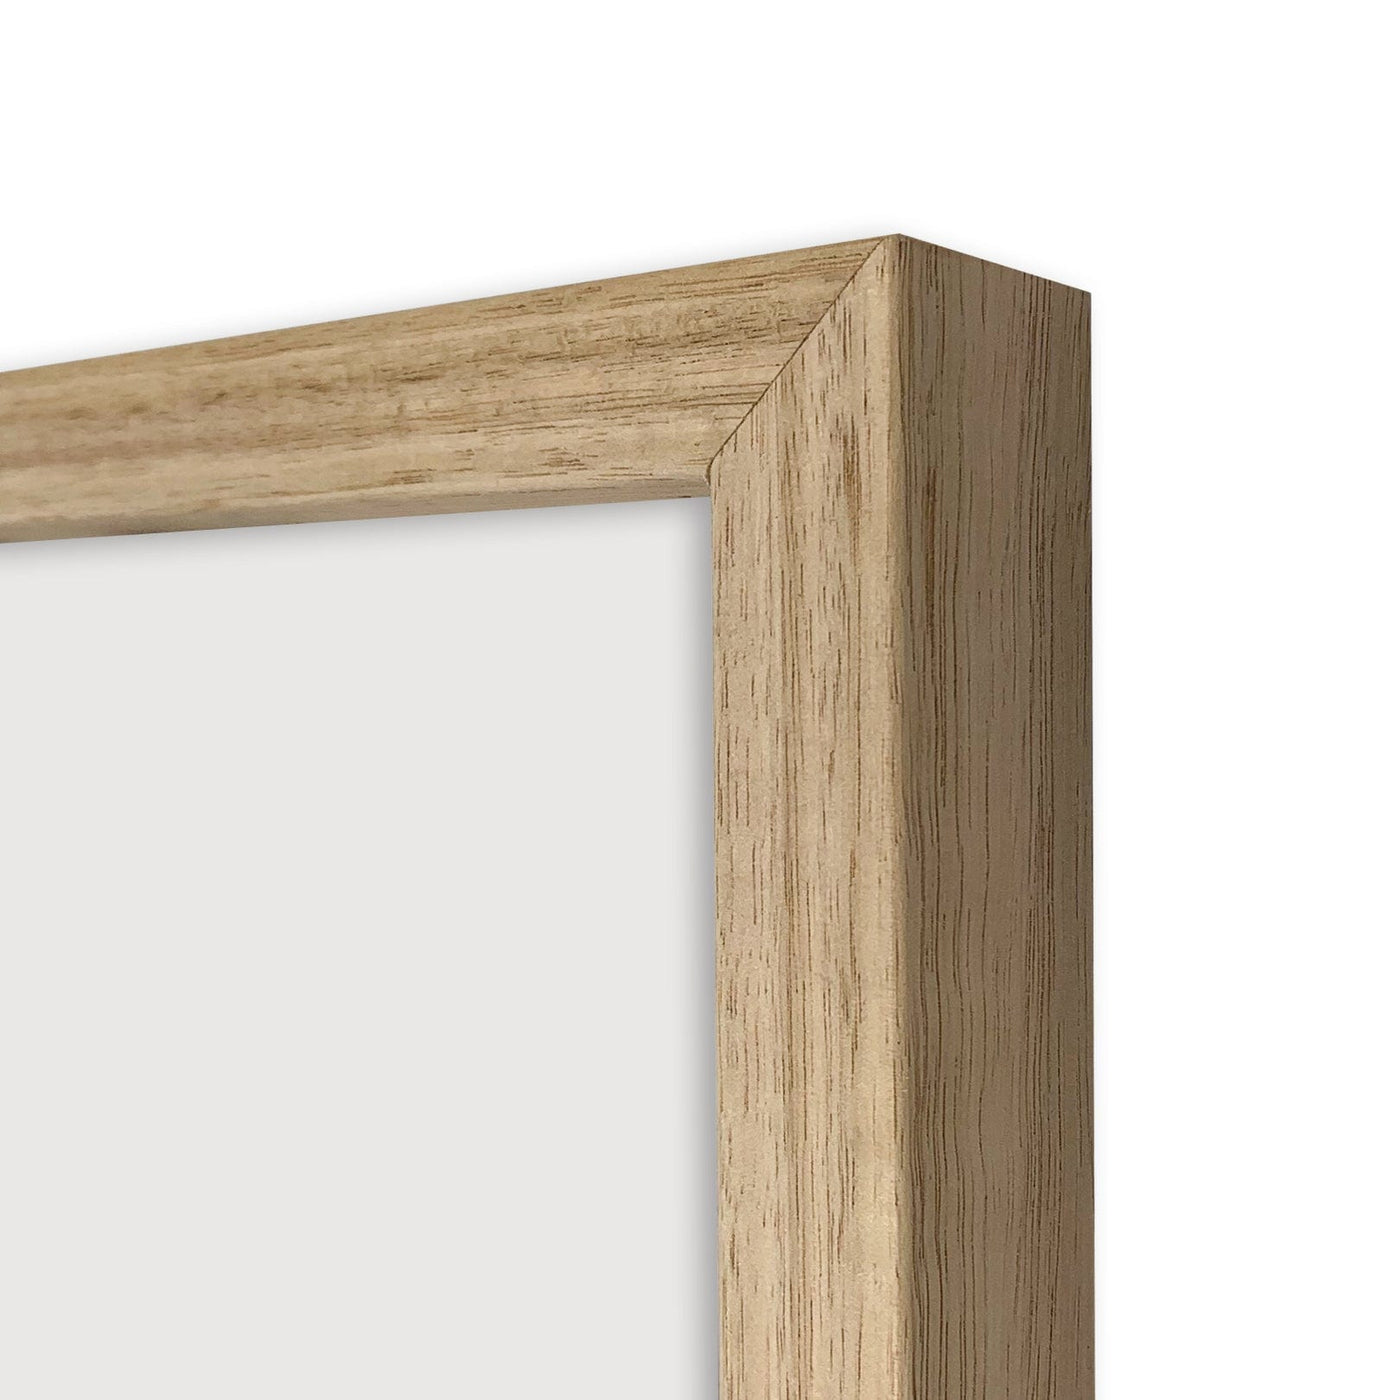 Elegant Victorian Ash Natural Oak Certificate Picture Frame from our Australian Made Picture Frames collection by Profile Products Australia